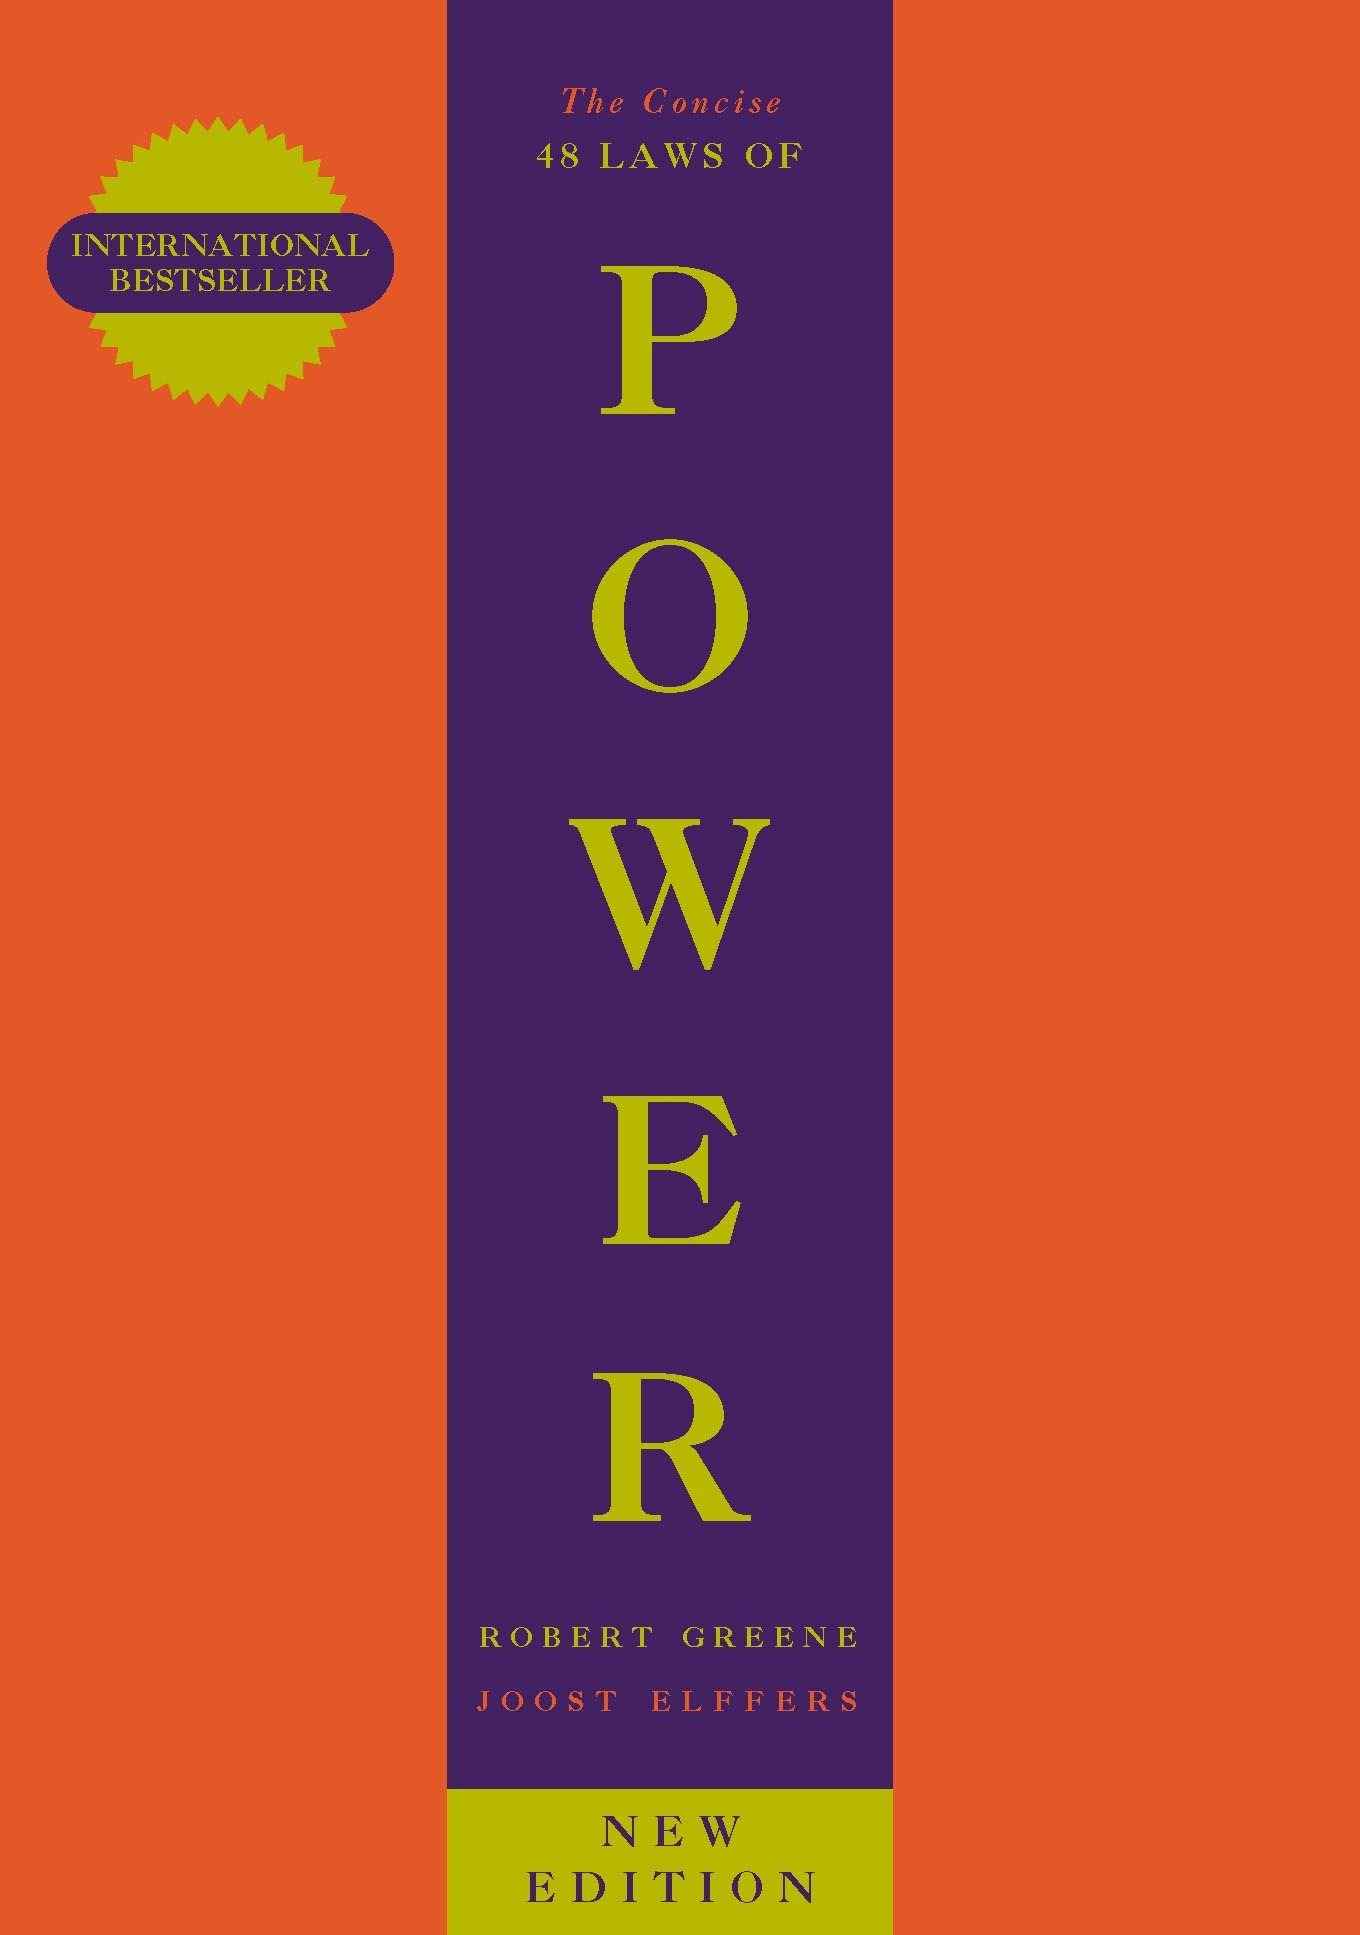 Concise 48 Laws of Power by ROBERT GREENE